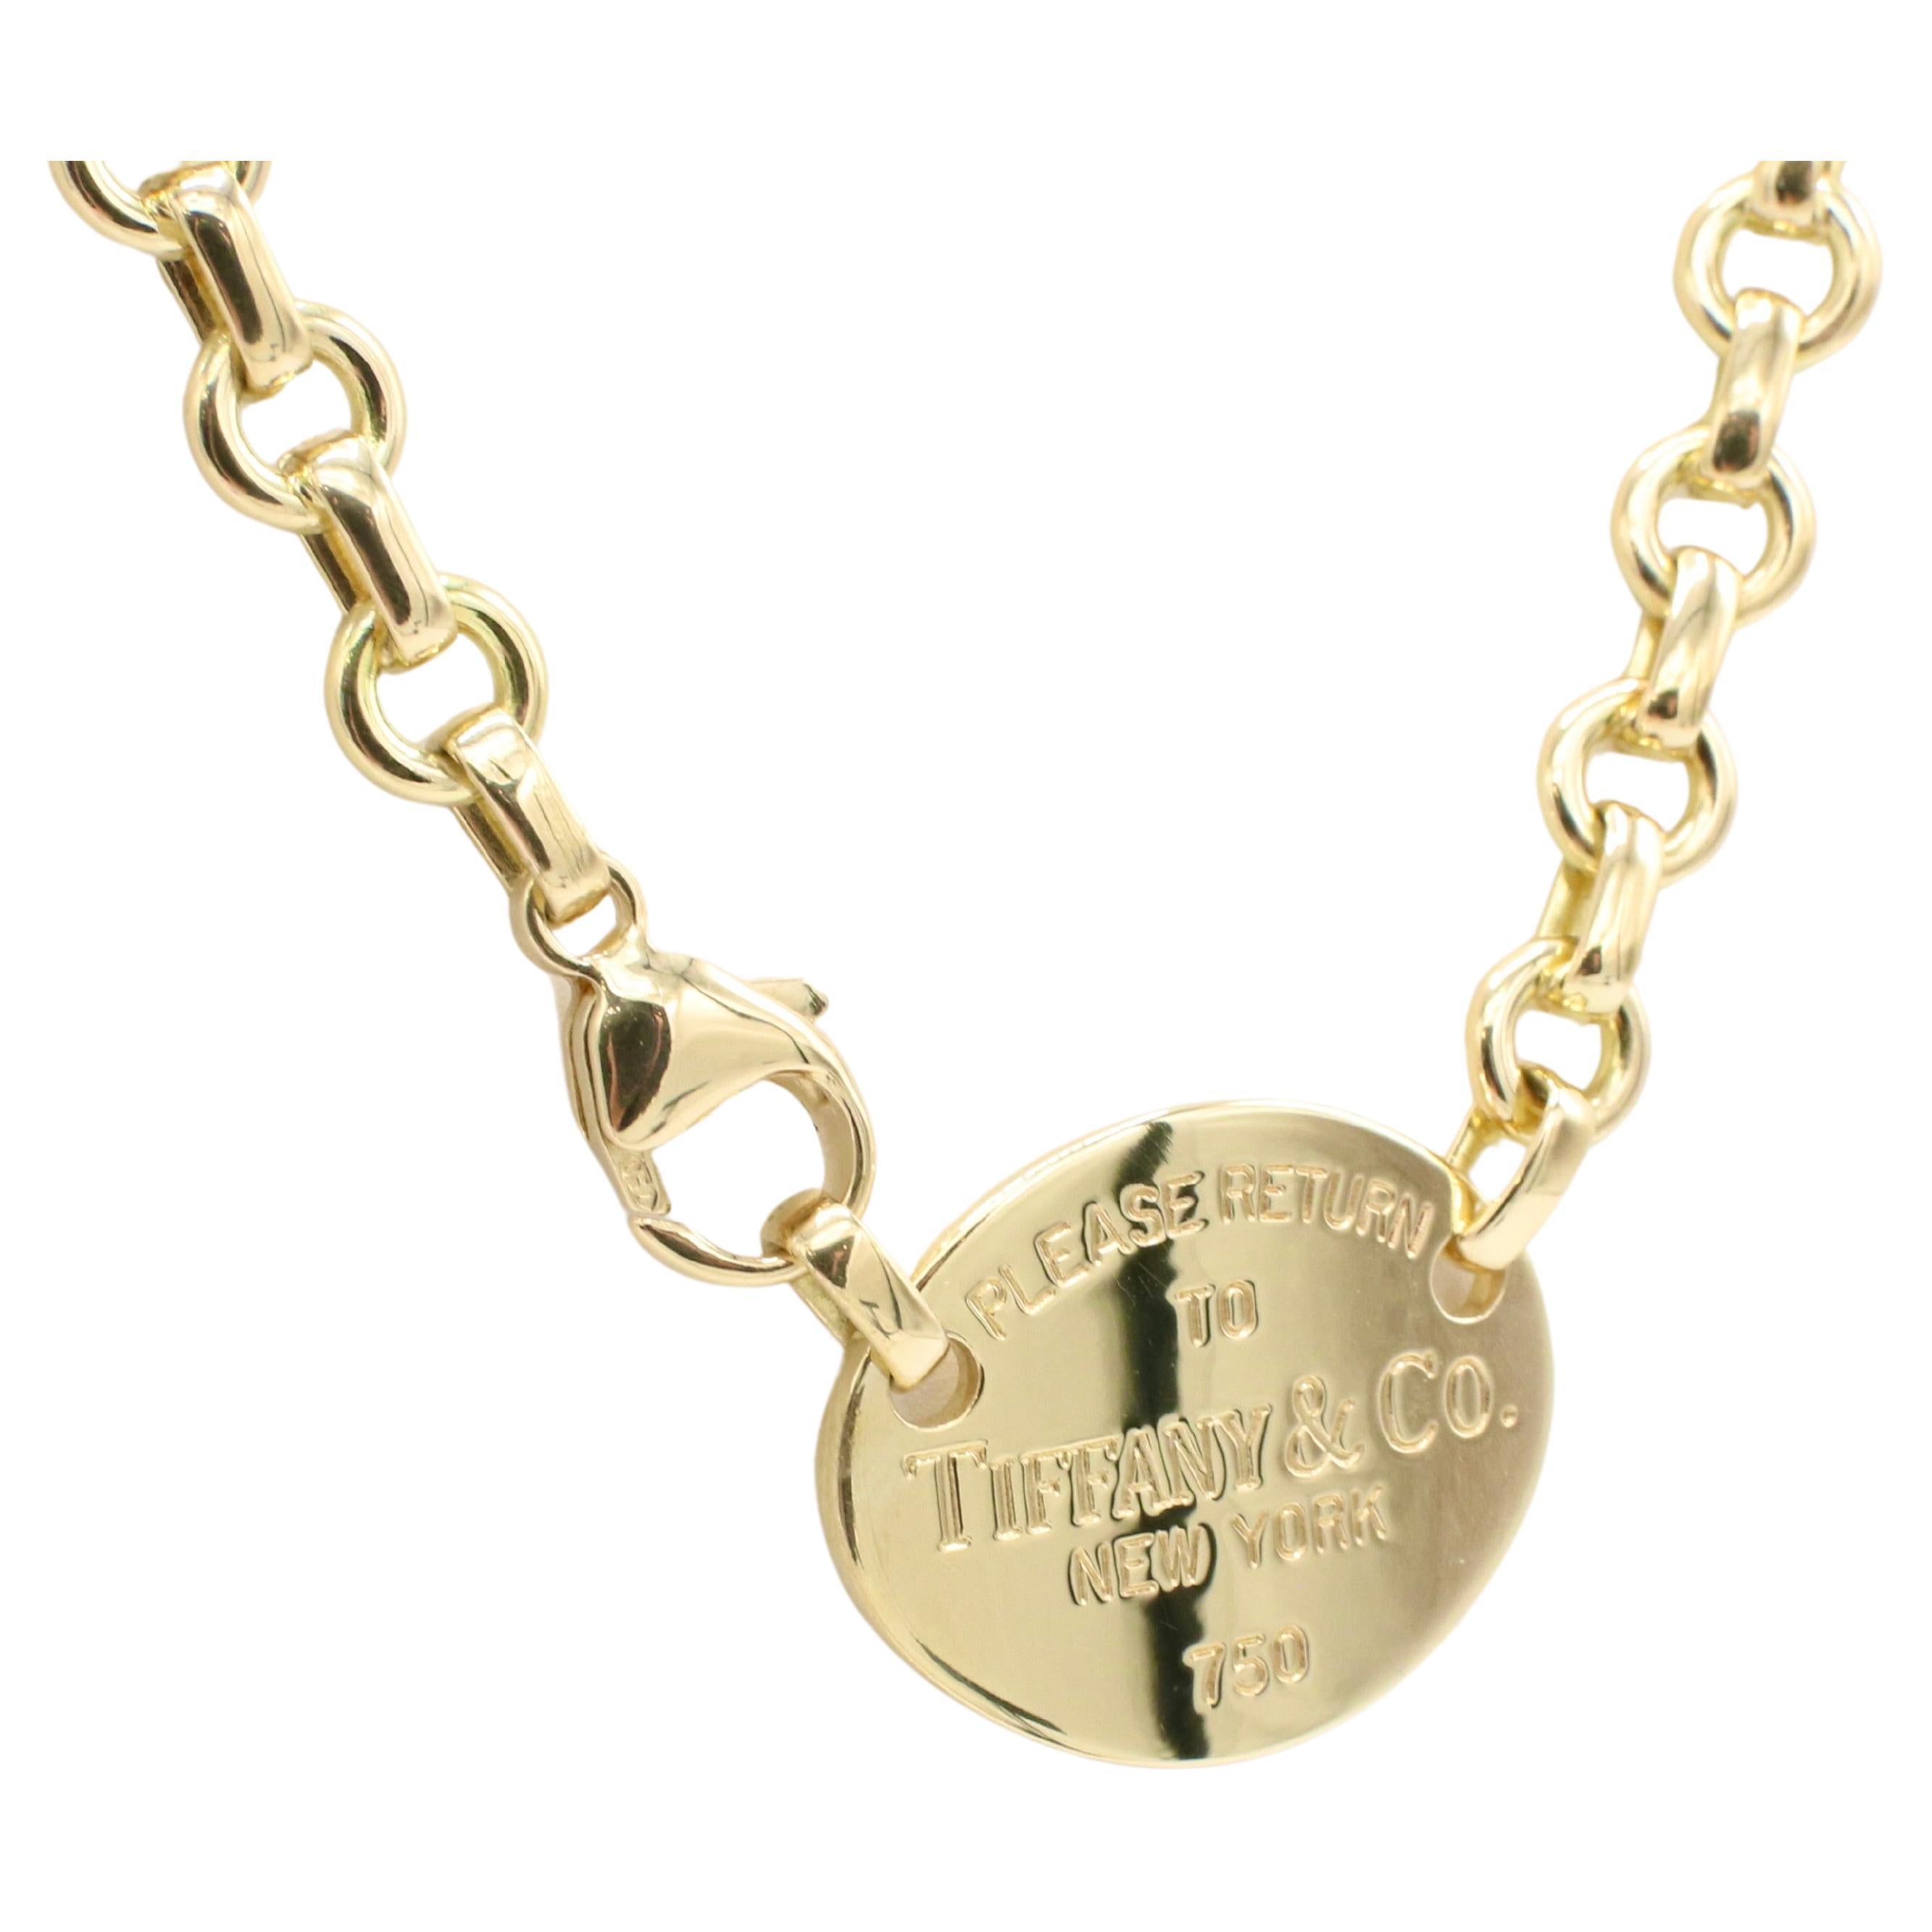 Tiffany & Co. Return To Tiffany 18 Karat Yellow Gold Chain Link Necklace
Metal: 18k yellow gold
Weight: 39.37 grams
Length: 16 inches
Tag: 22.5 x 18mm
Signed: PLEASE RETURN TO TIFFANY & CO. NEW YORK 750 
